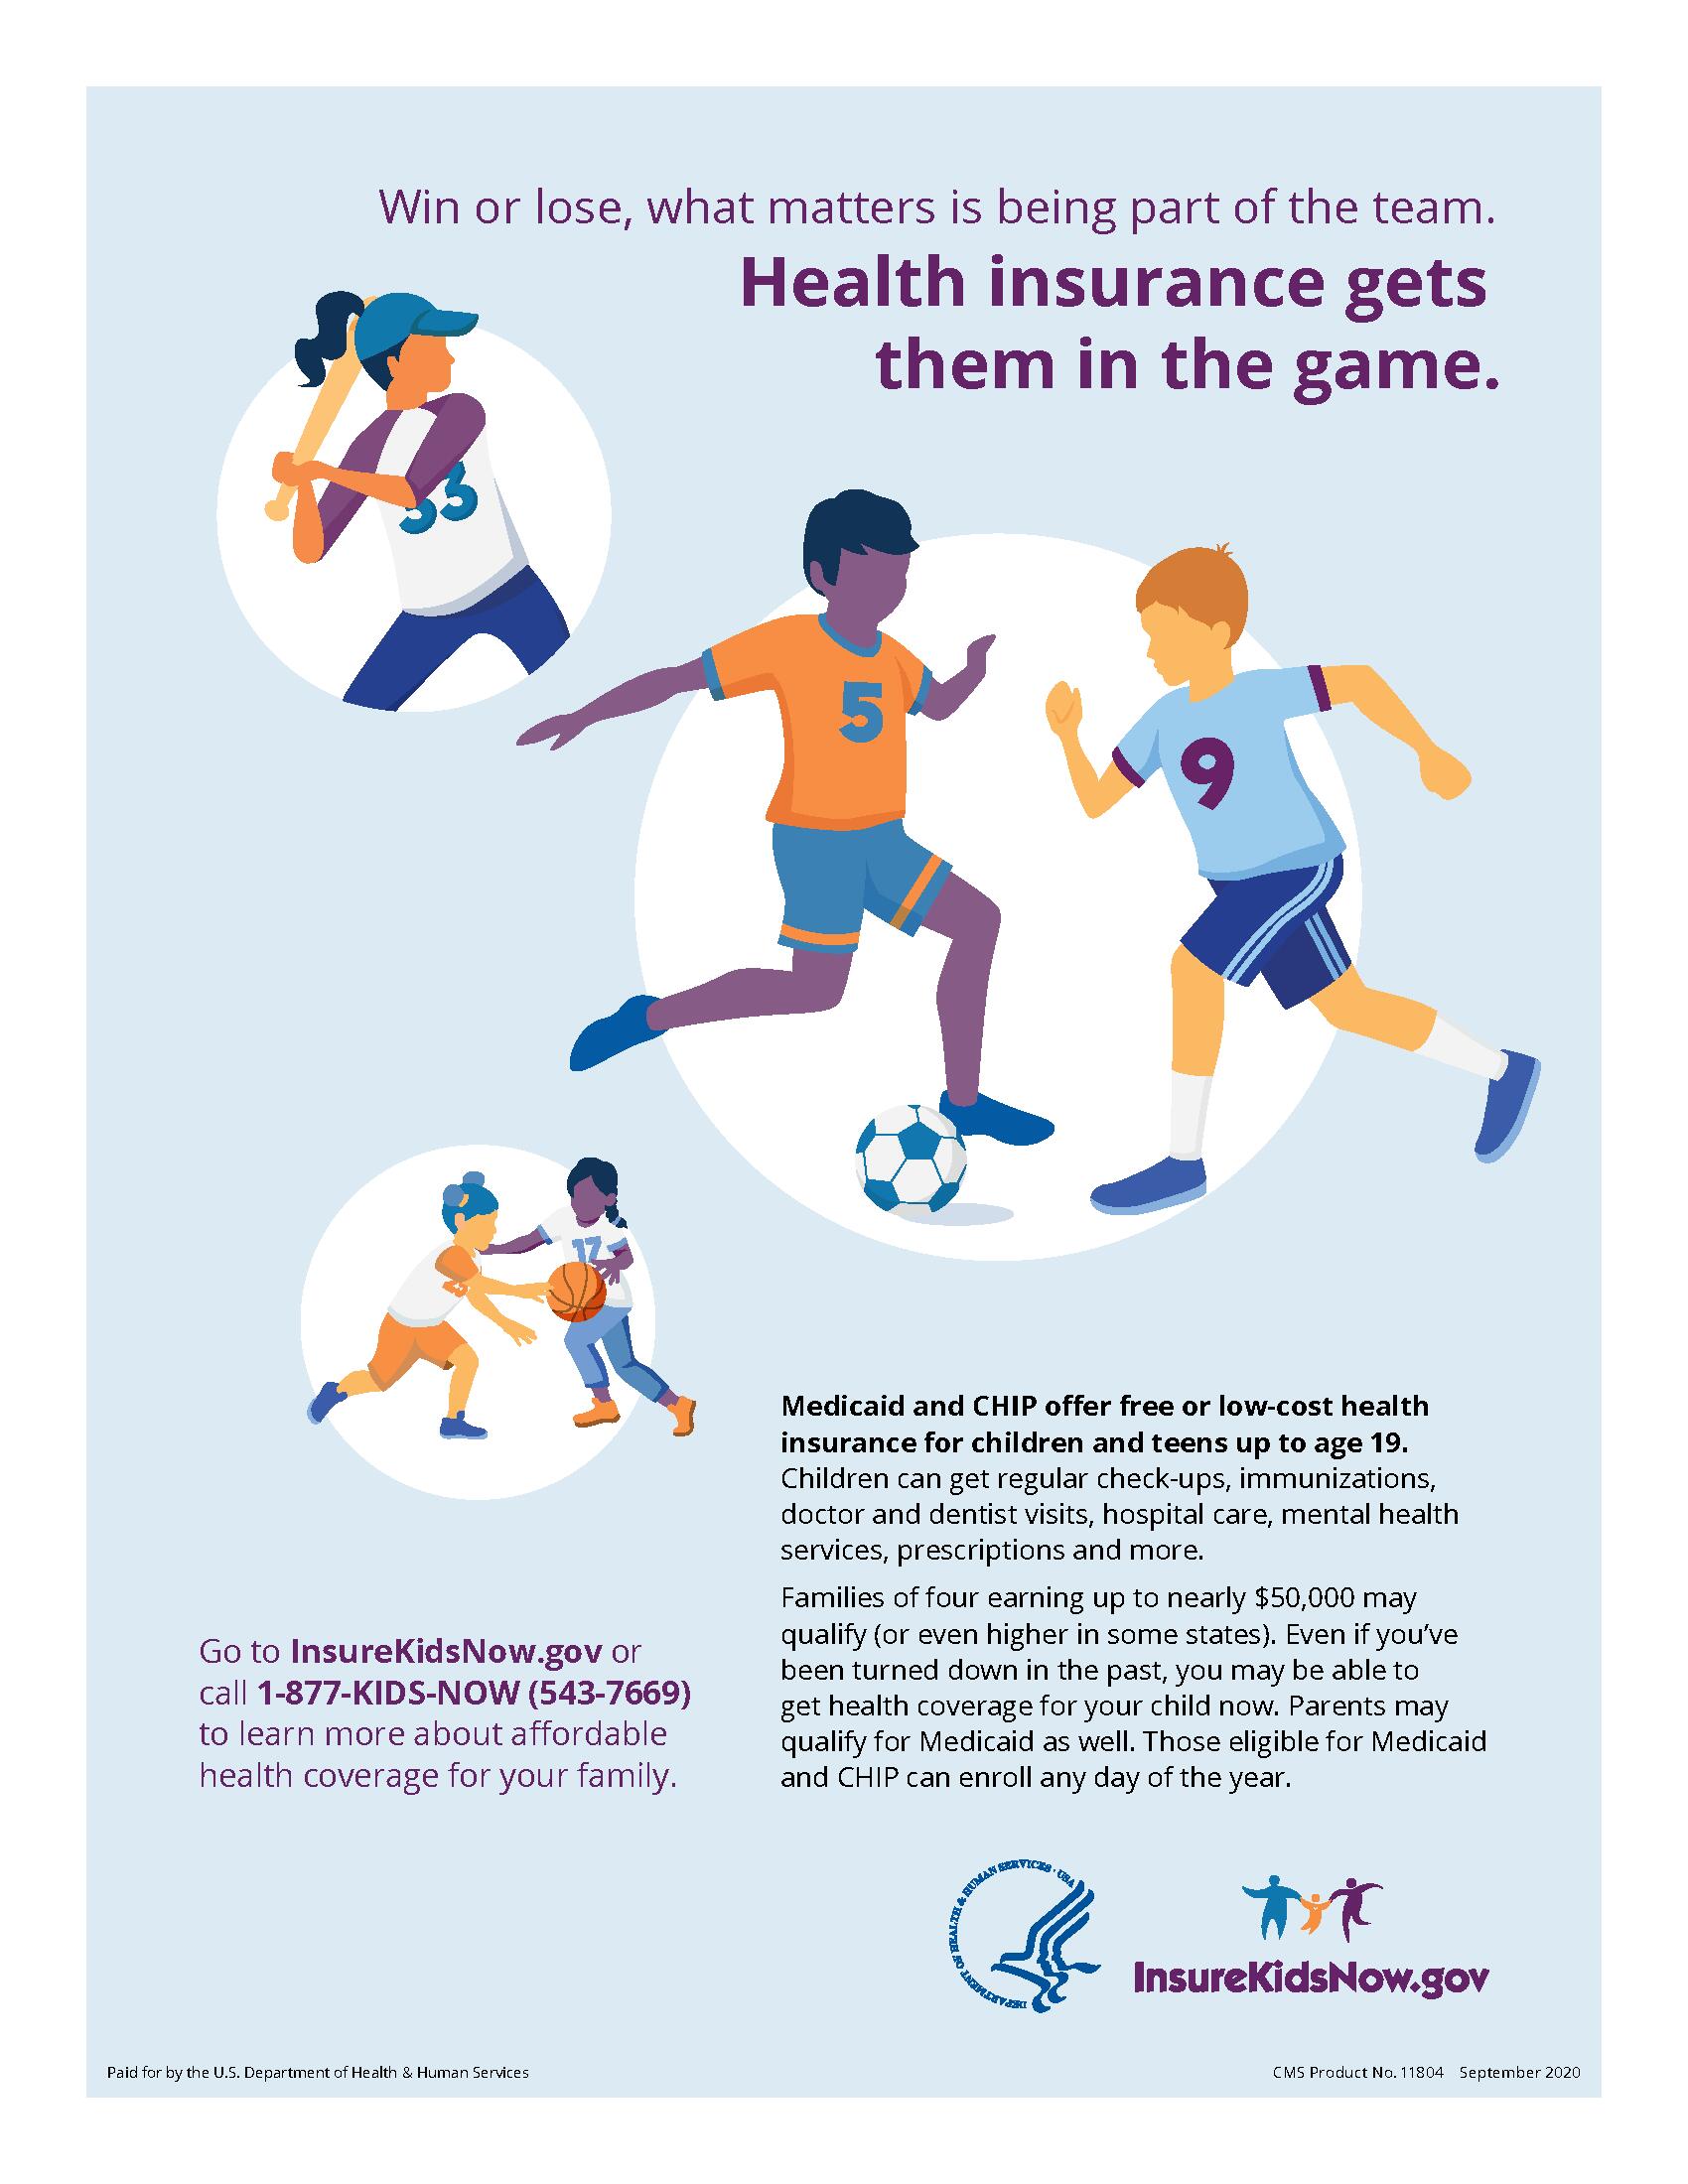 Health insurance gets them in the game flyer